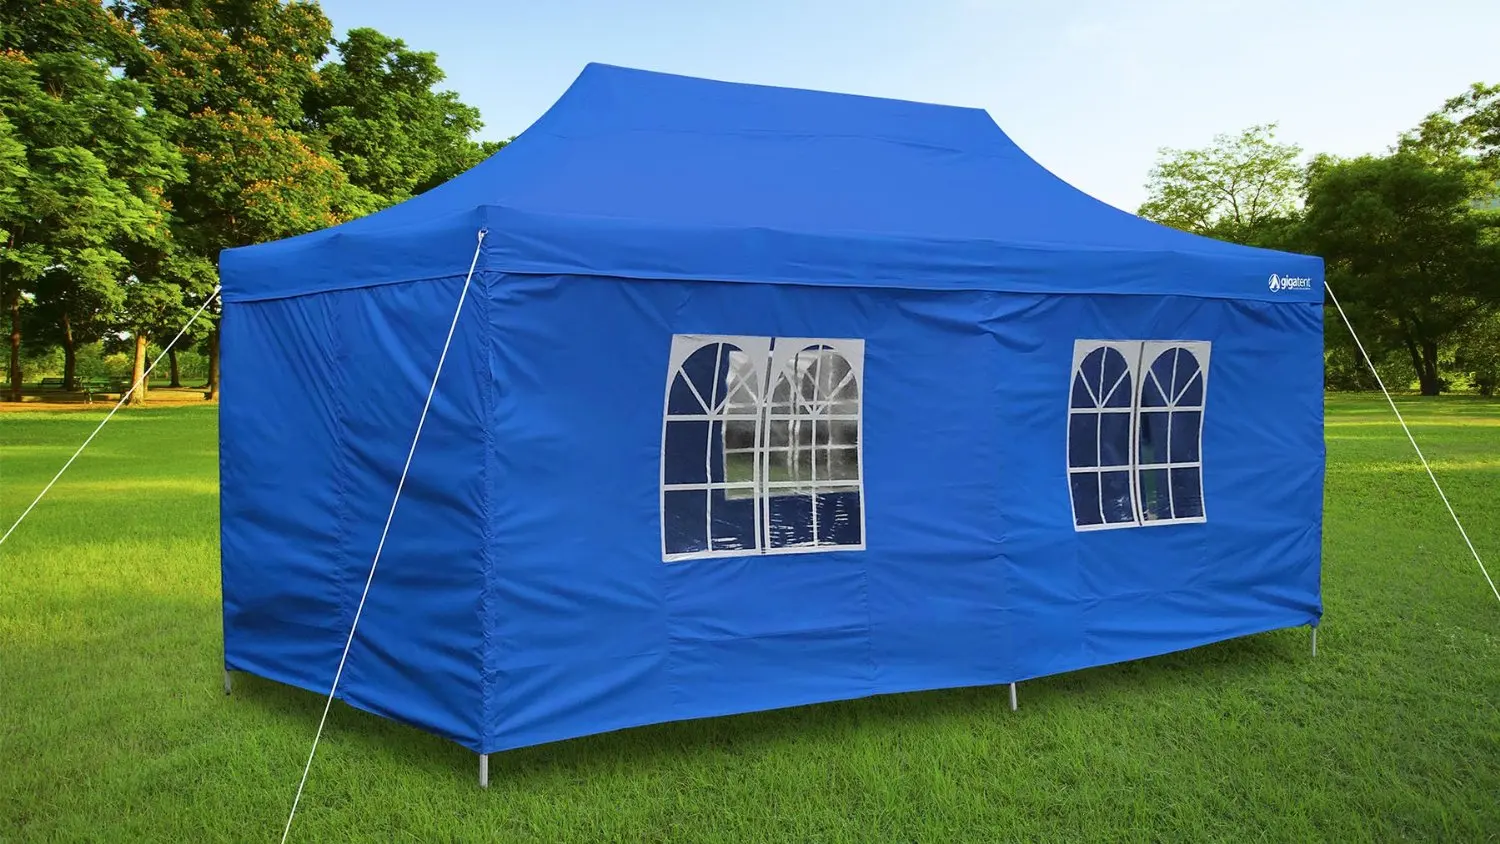 Buy GigaTent The Party Tent Deluxe 10 x 20 Canopy, Blue in ...